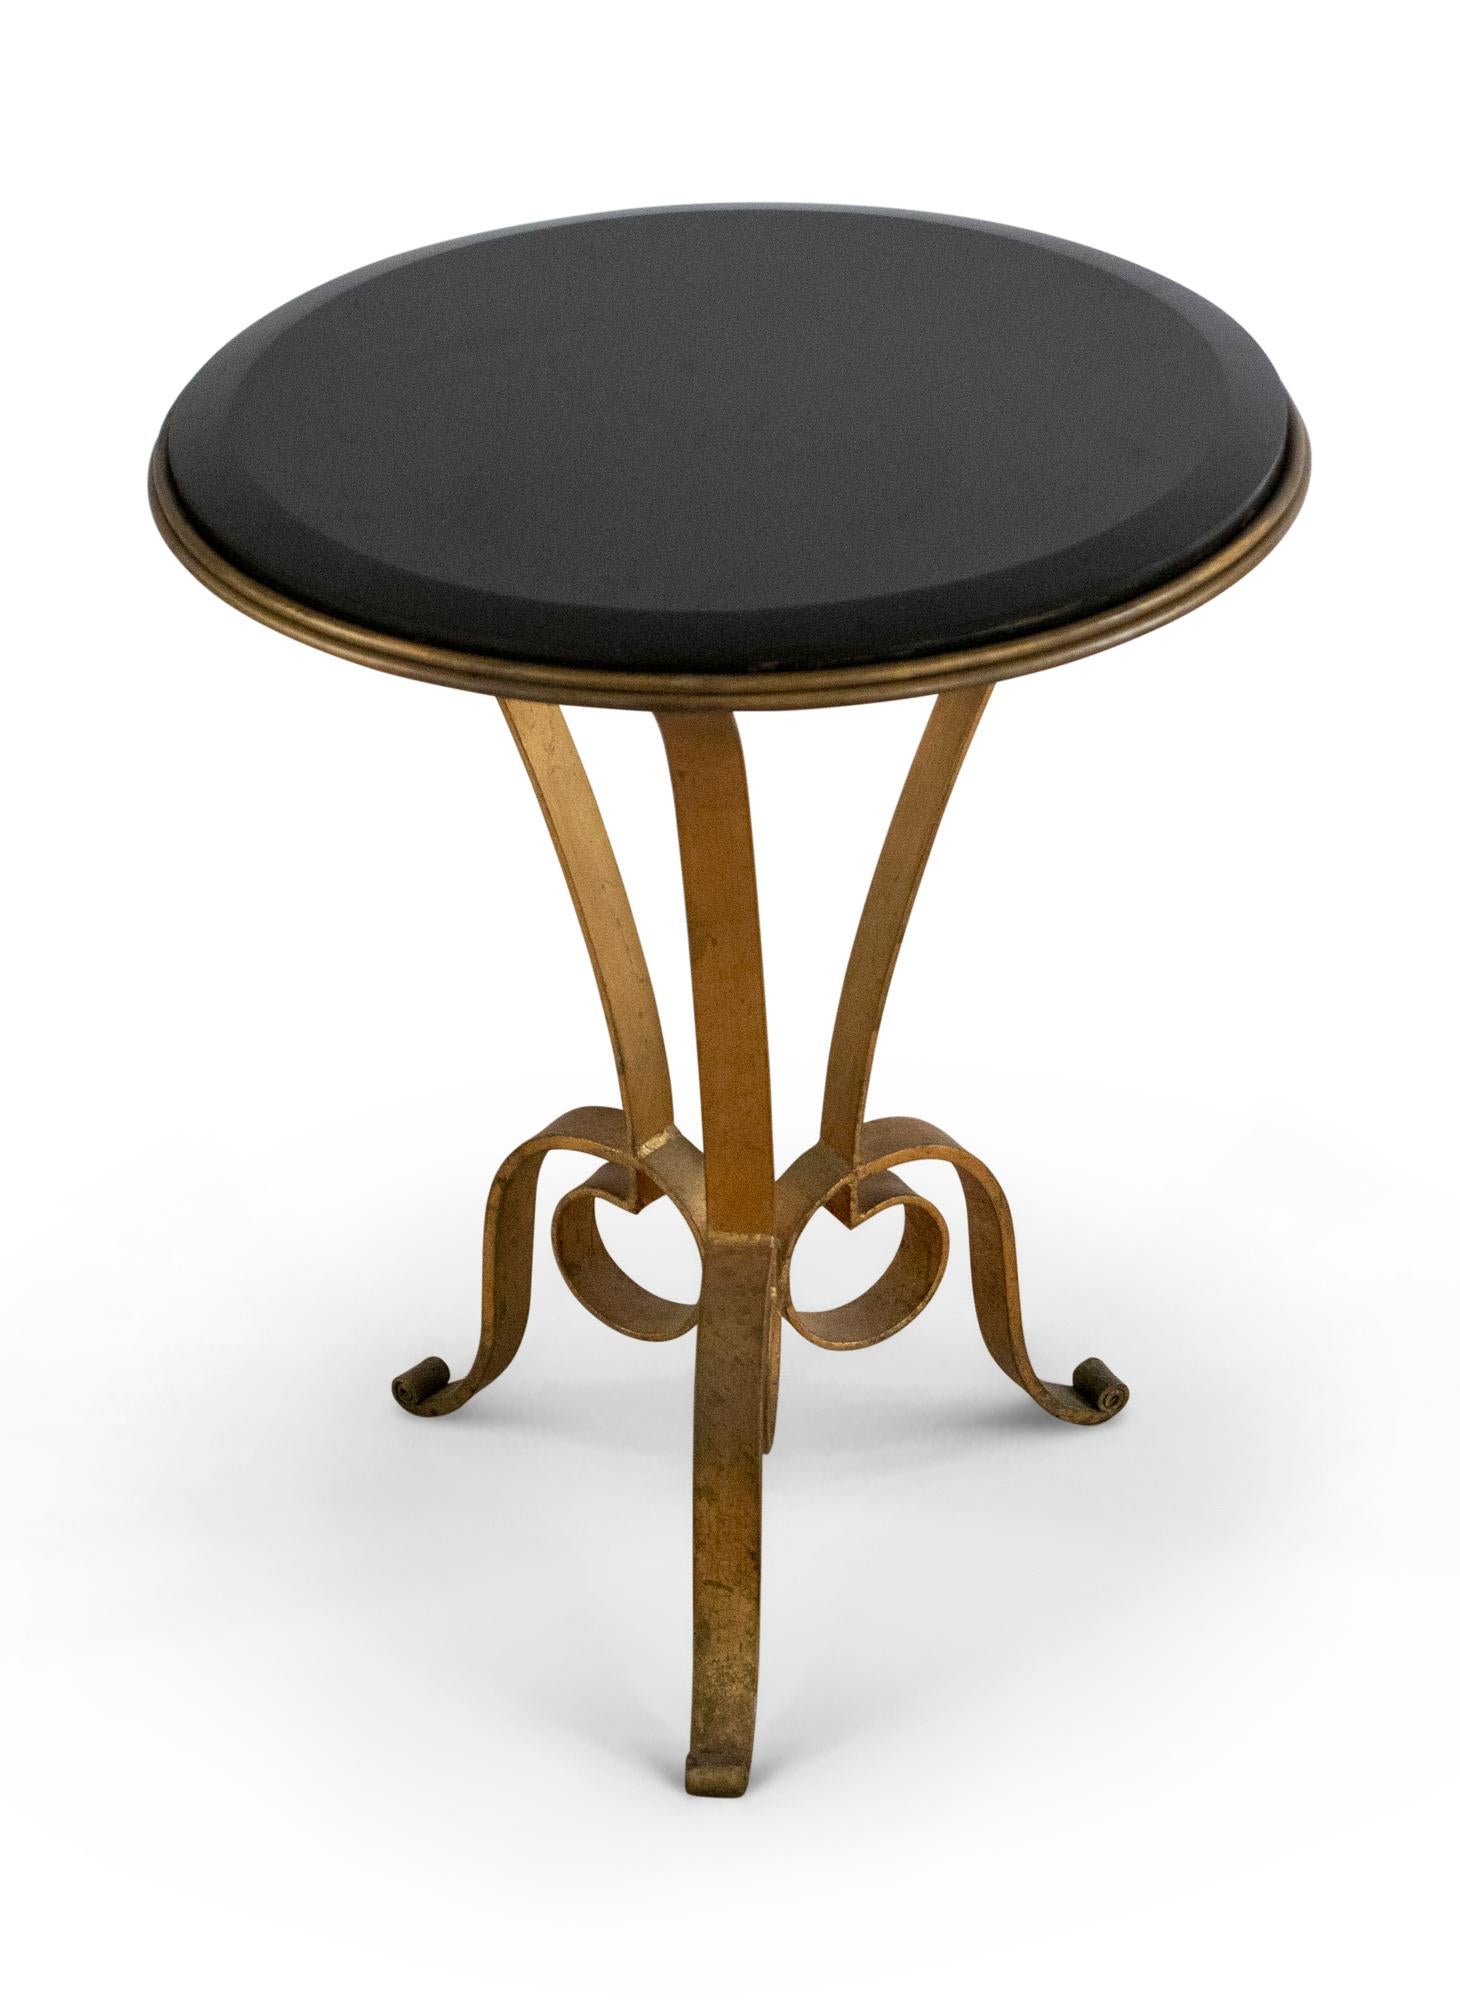 Pair of French Art Deco-style side / end table with curved gilt metal frames with three leg bases and circular black marble table tops.